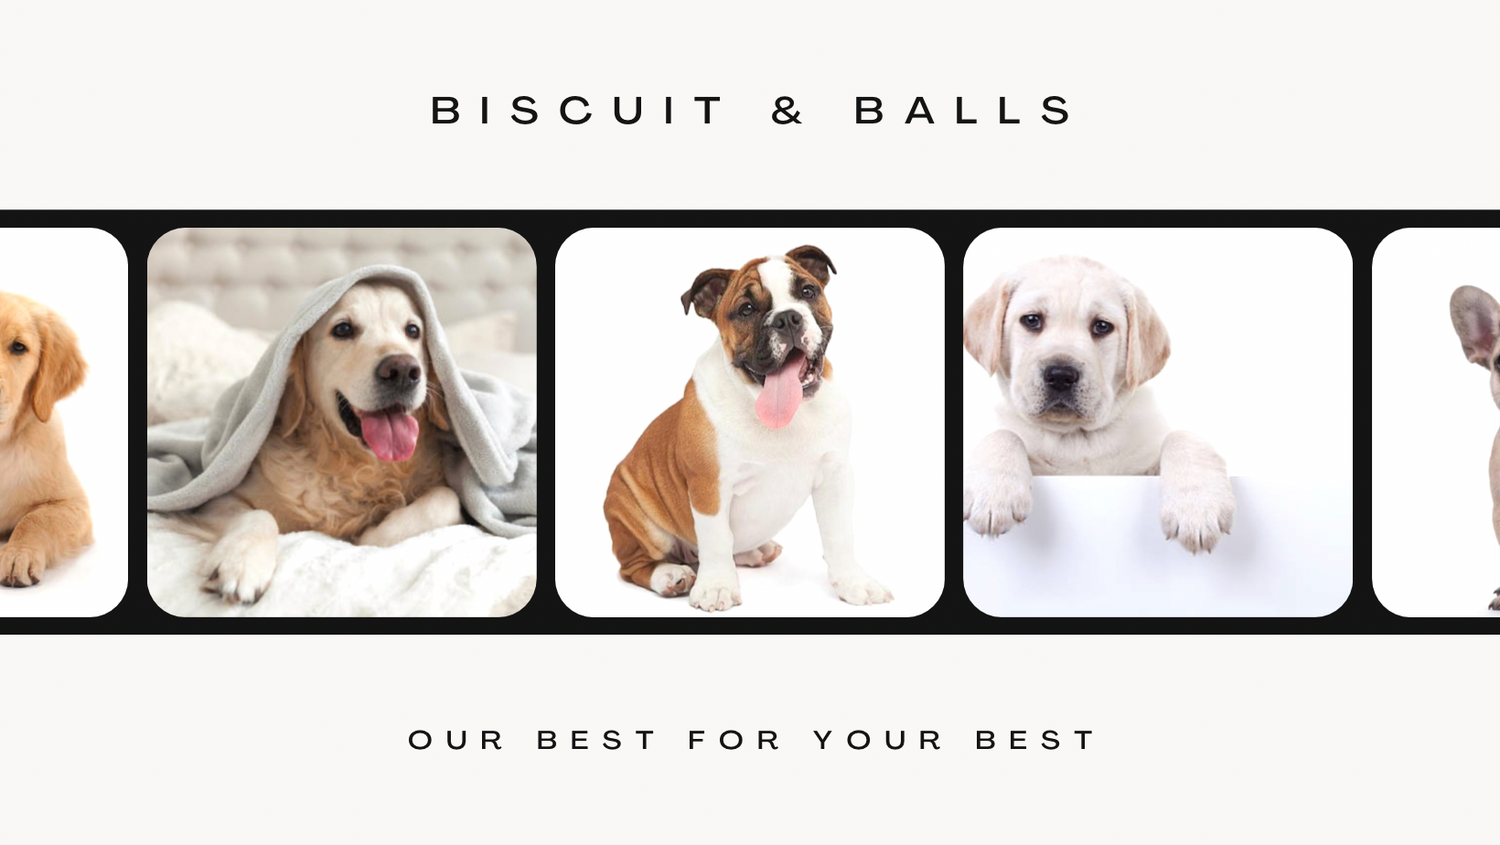 Biscuit & Balls "Our Best for Your Best"